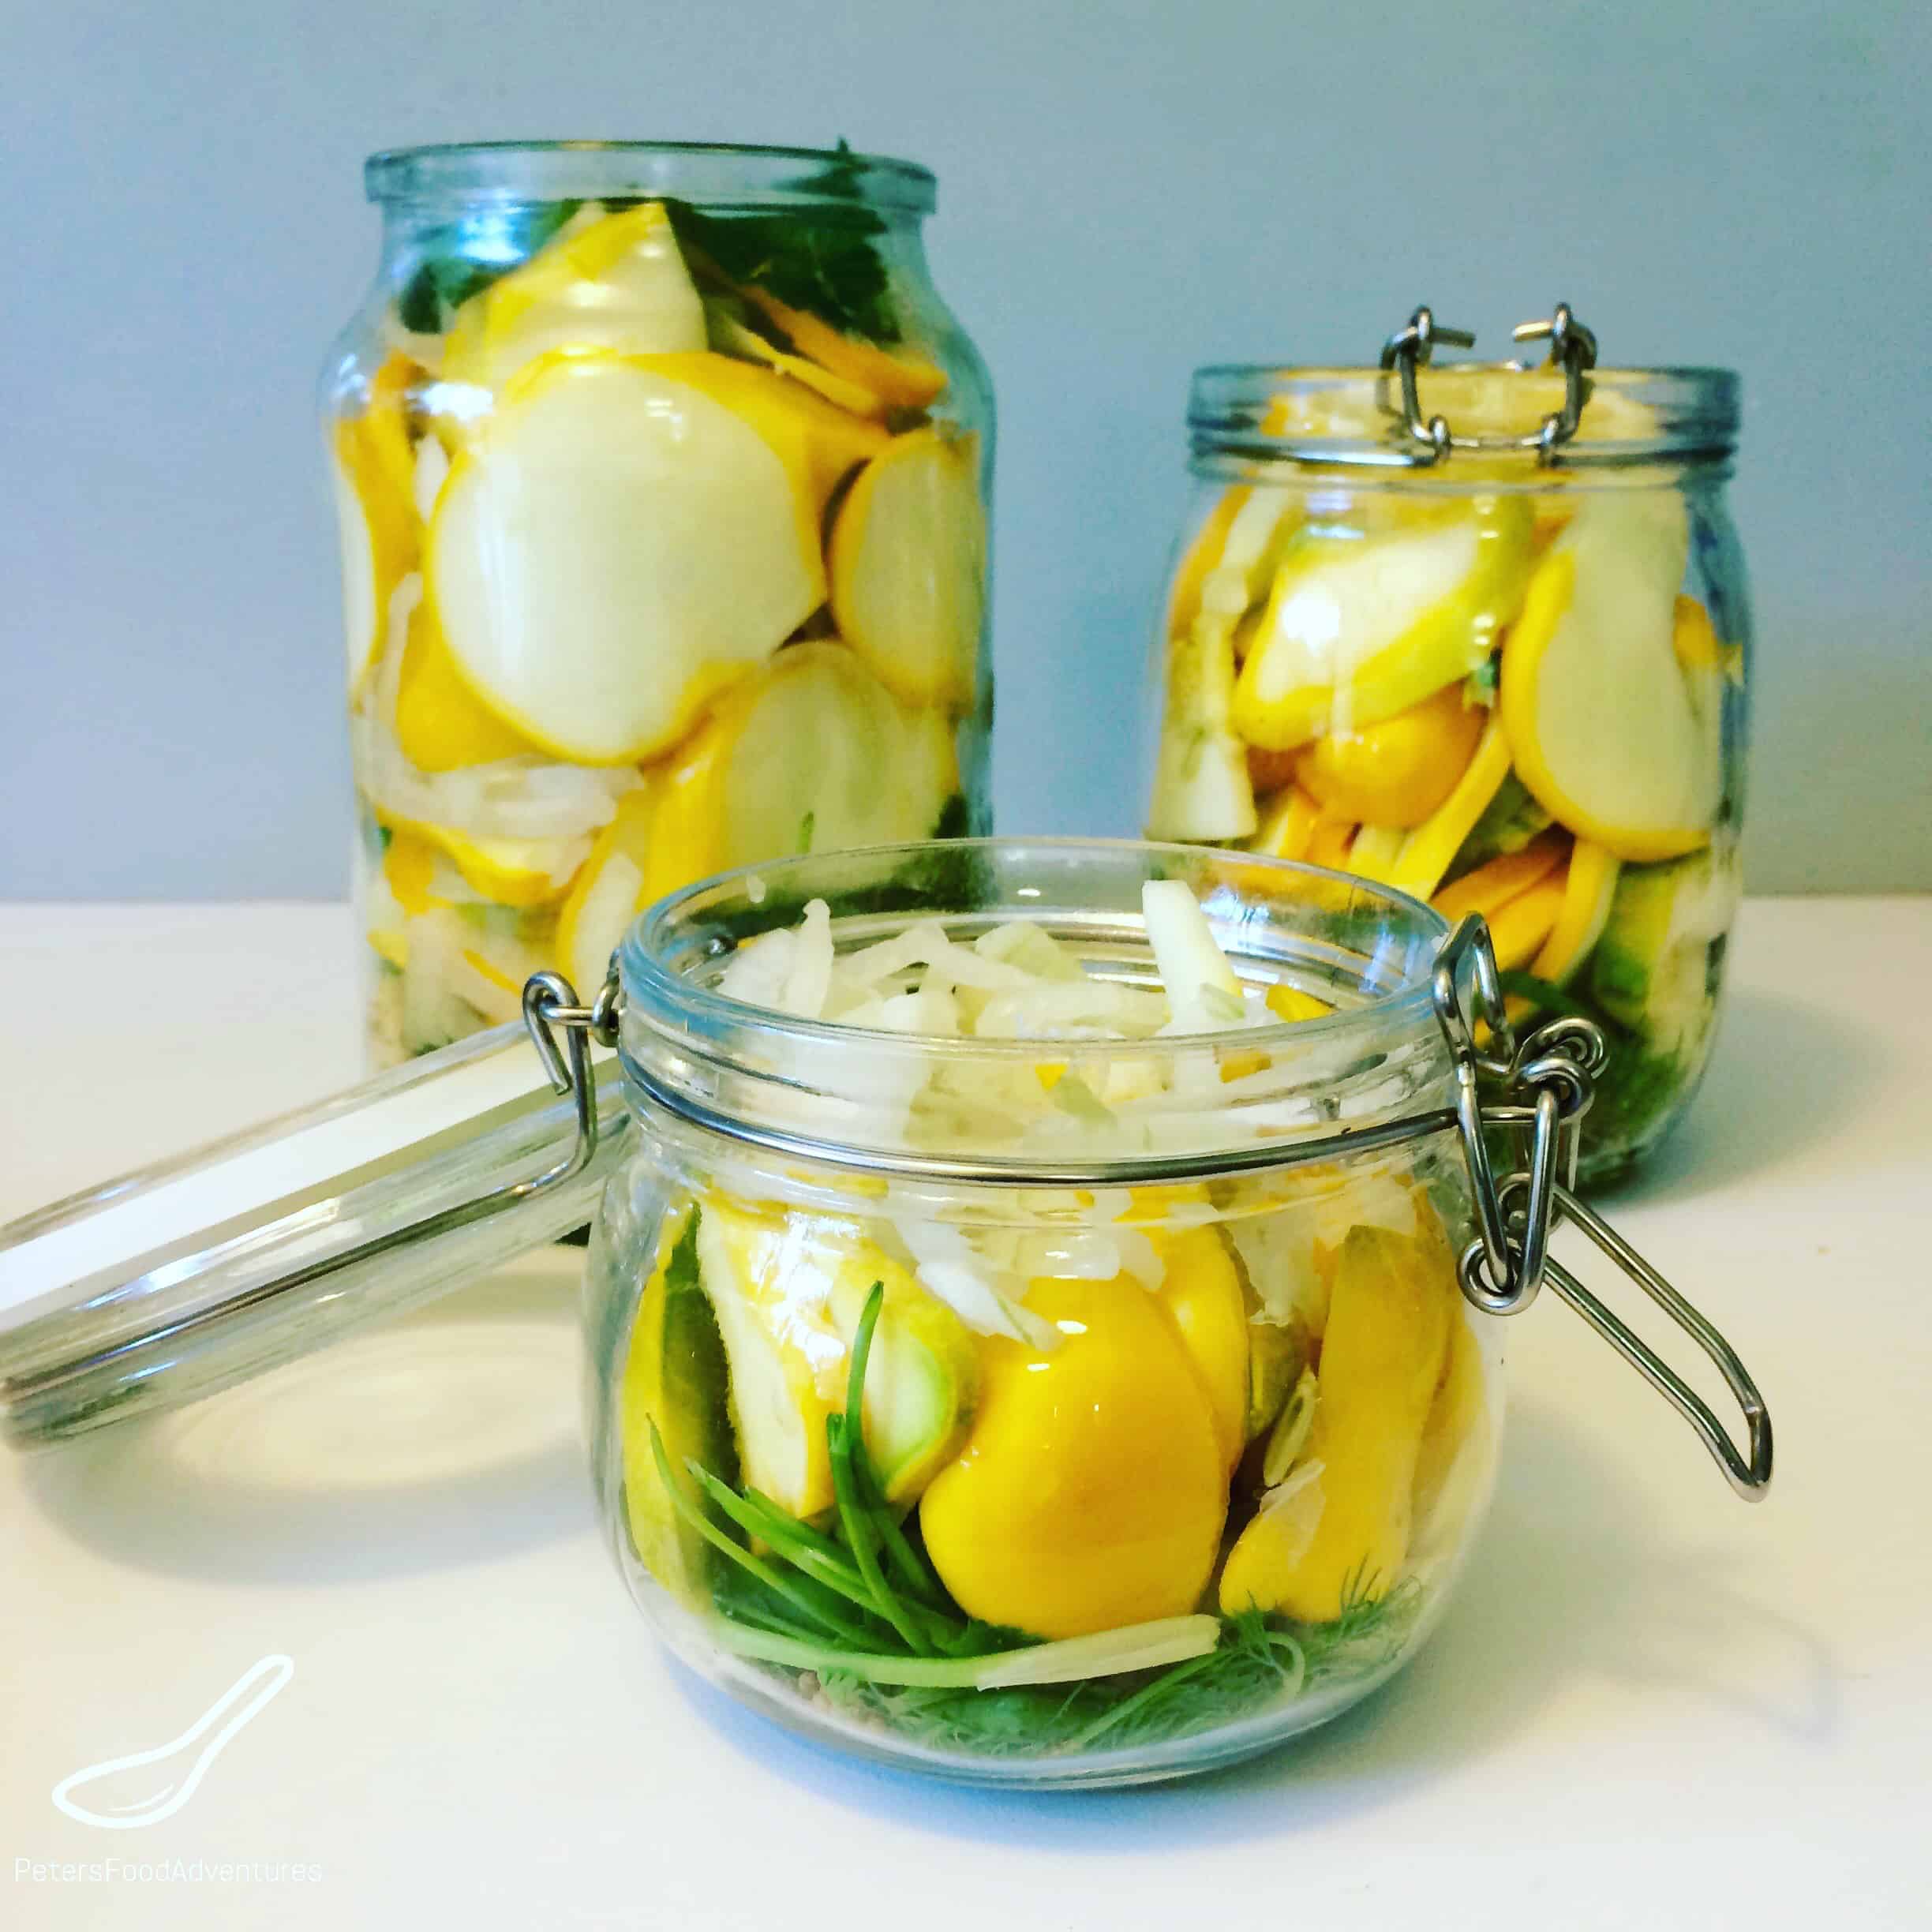 Quick Pickled Summer Squash - A great way to preserve your vegetables. These are so good! Throw a few on a hamburger, Perfect condiment for bbq season this summer!